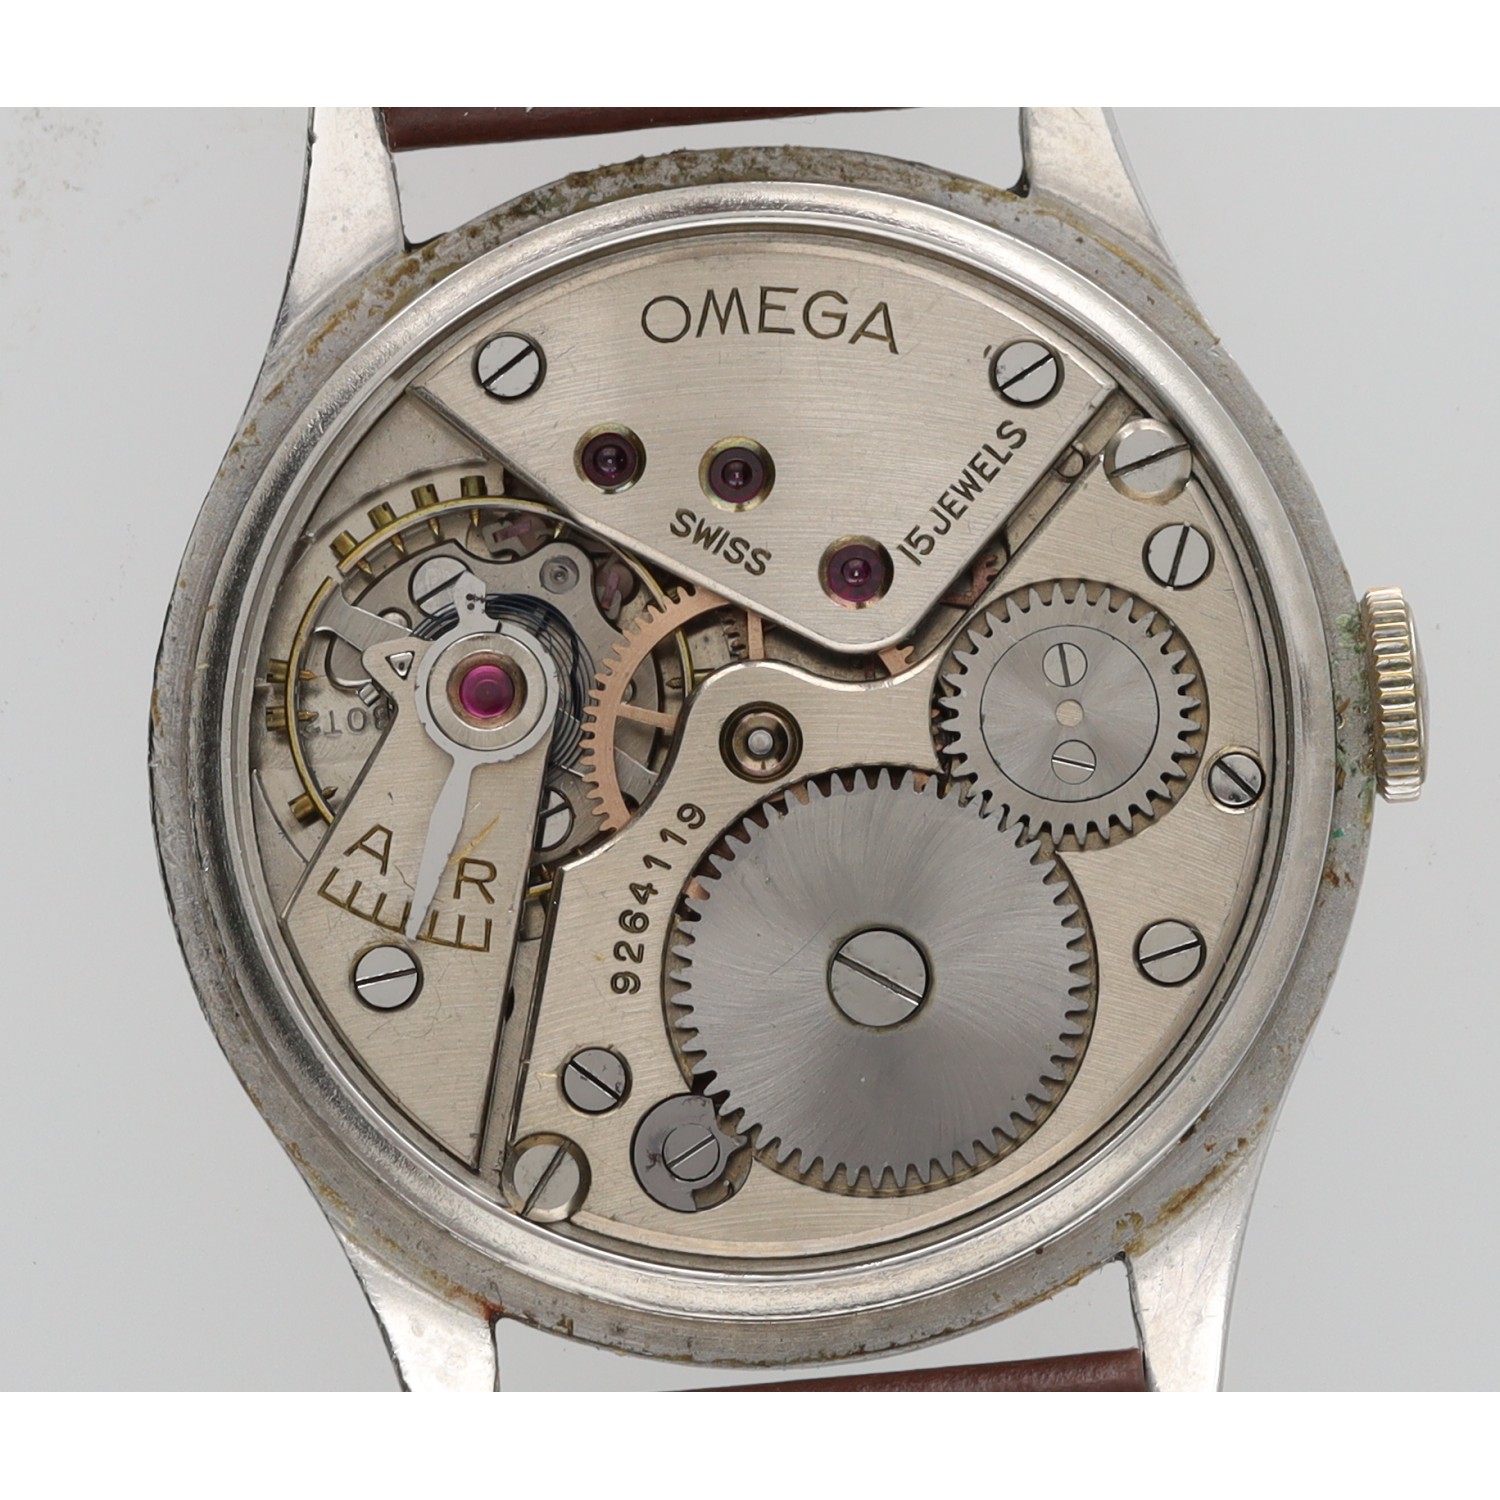 Omega stainless steel gentleman's wristwatch, case no. 10110871, serial no. 9264xxx, circa 1939, - Image 5 of 8